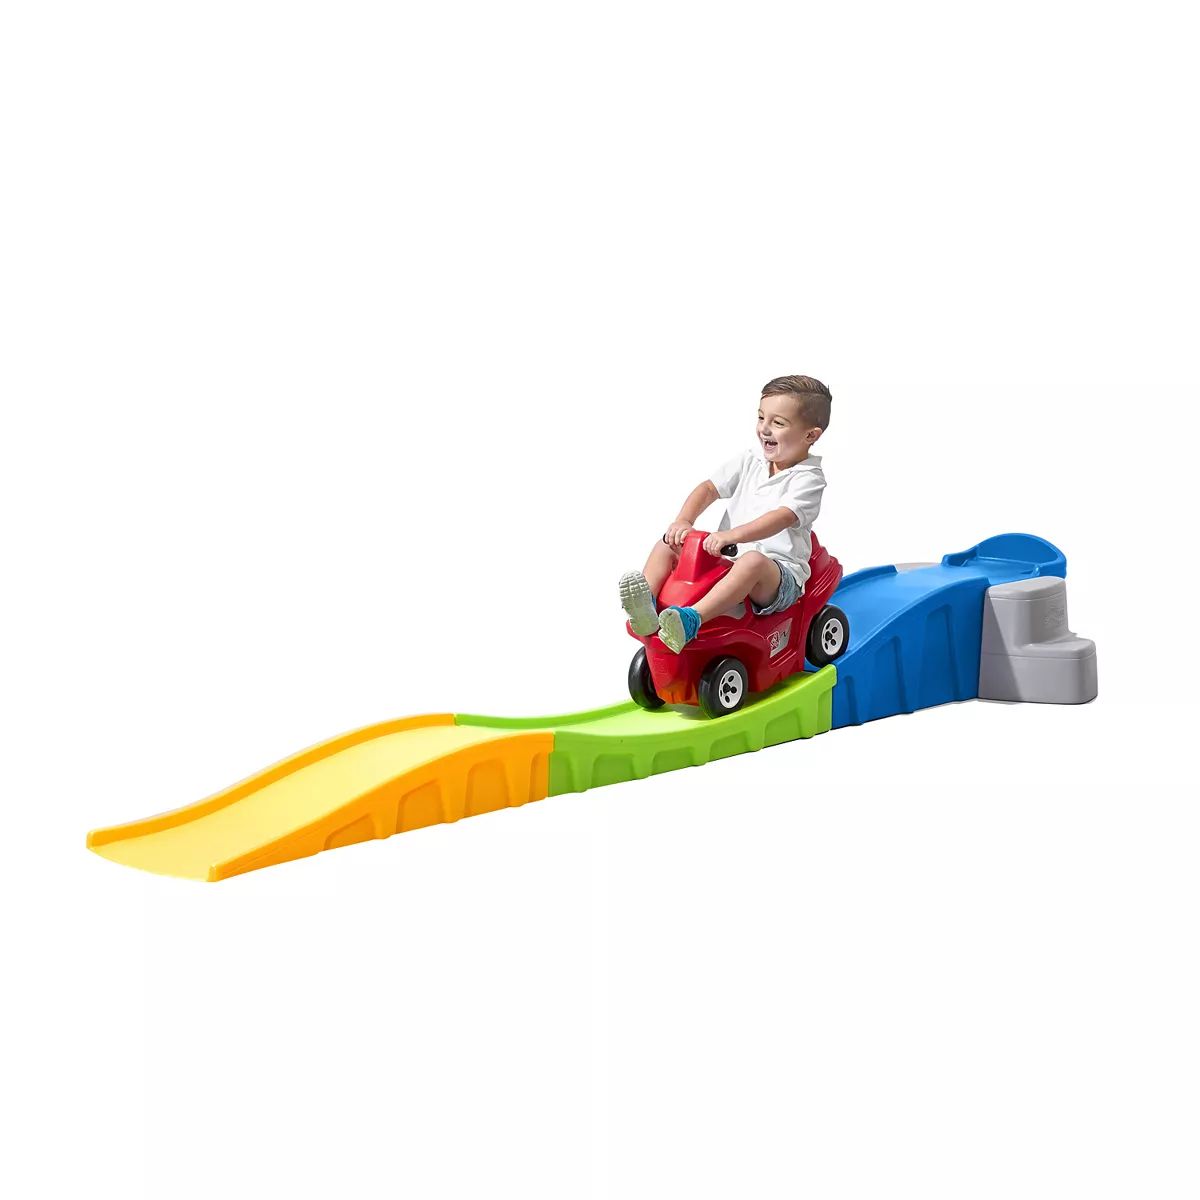 Step2 Anniversary Edition Up & Down Roller Coaster | Kohl's